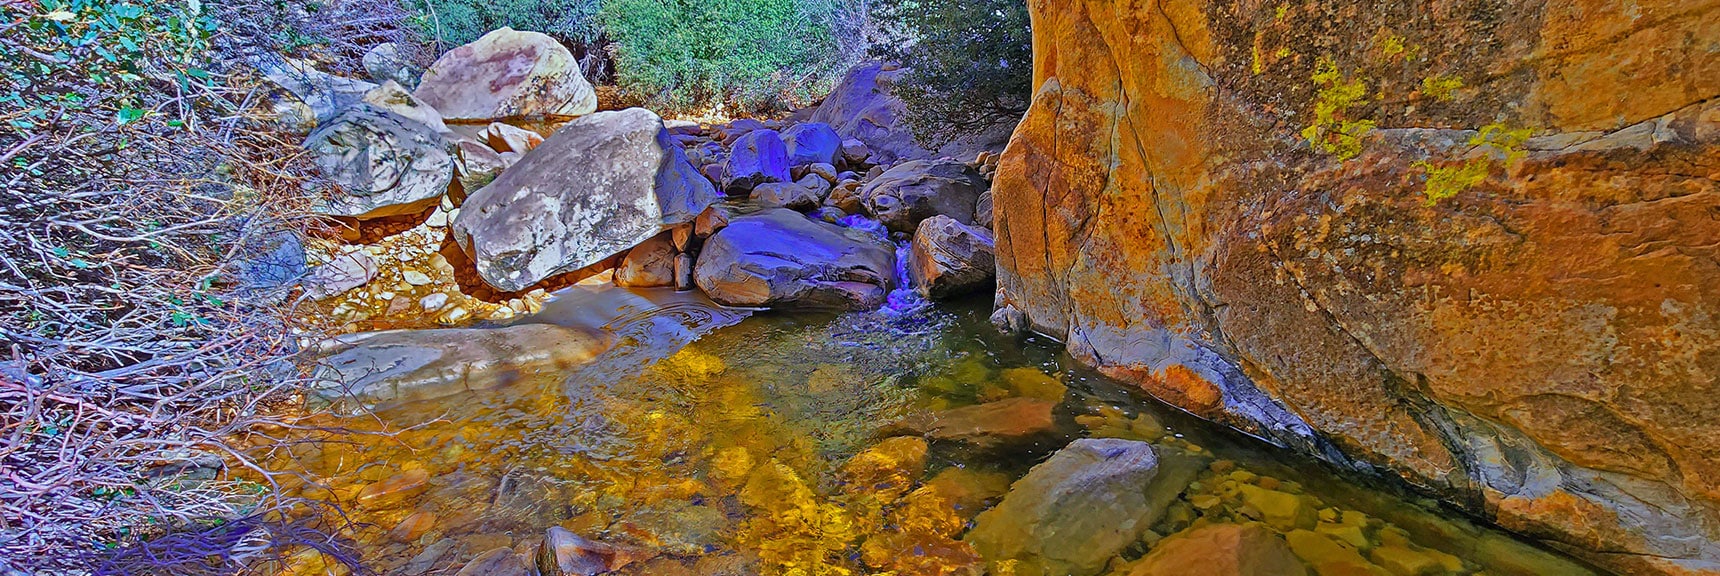 Many Peaceful Pools Fed By Cascading Waterfalls | Ice Box Canyon | Red Rock Canyon NCA, Nevada | Las Vegas Area Trails | David Smith